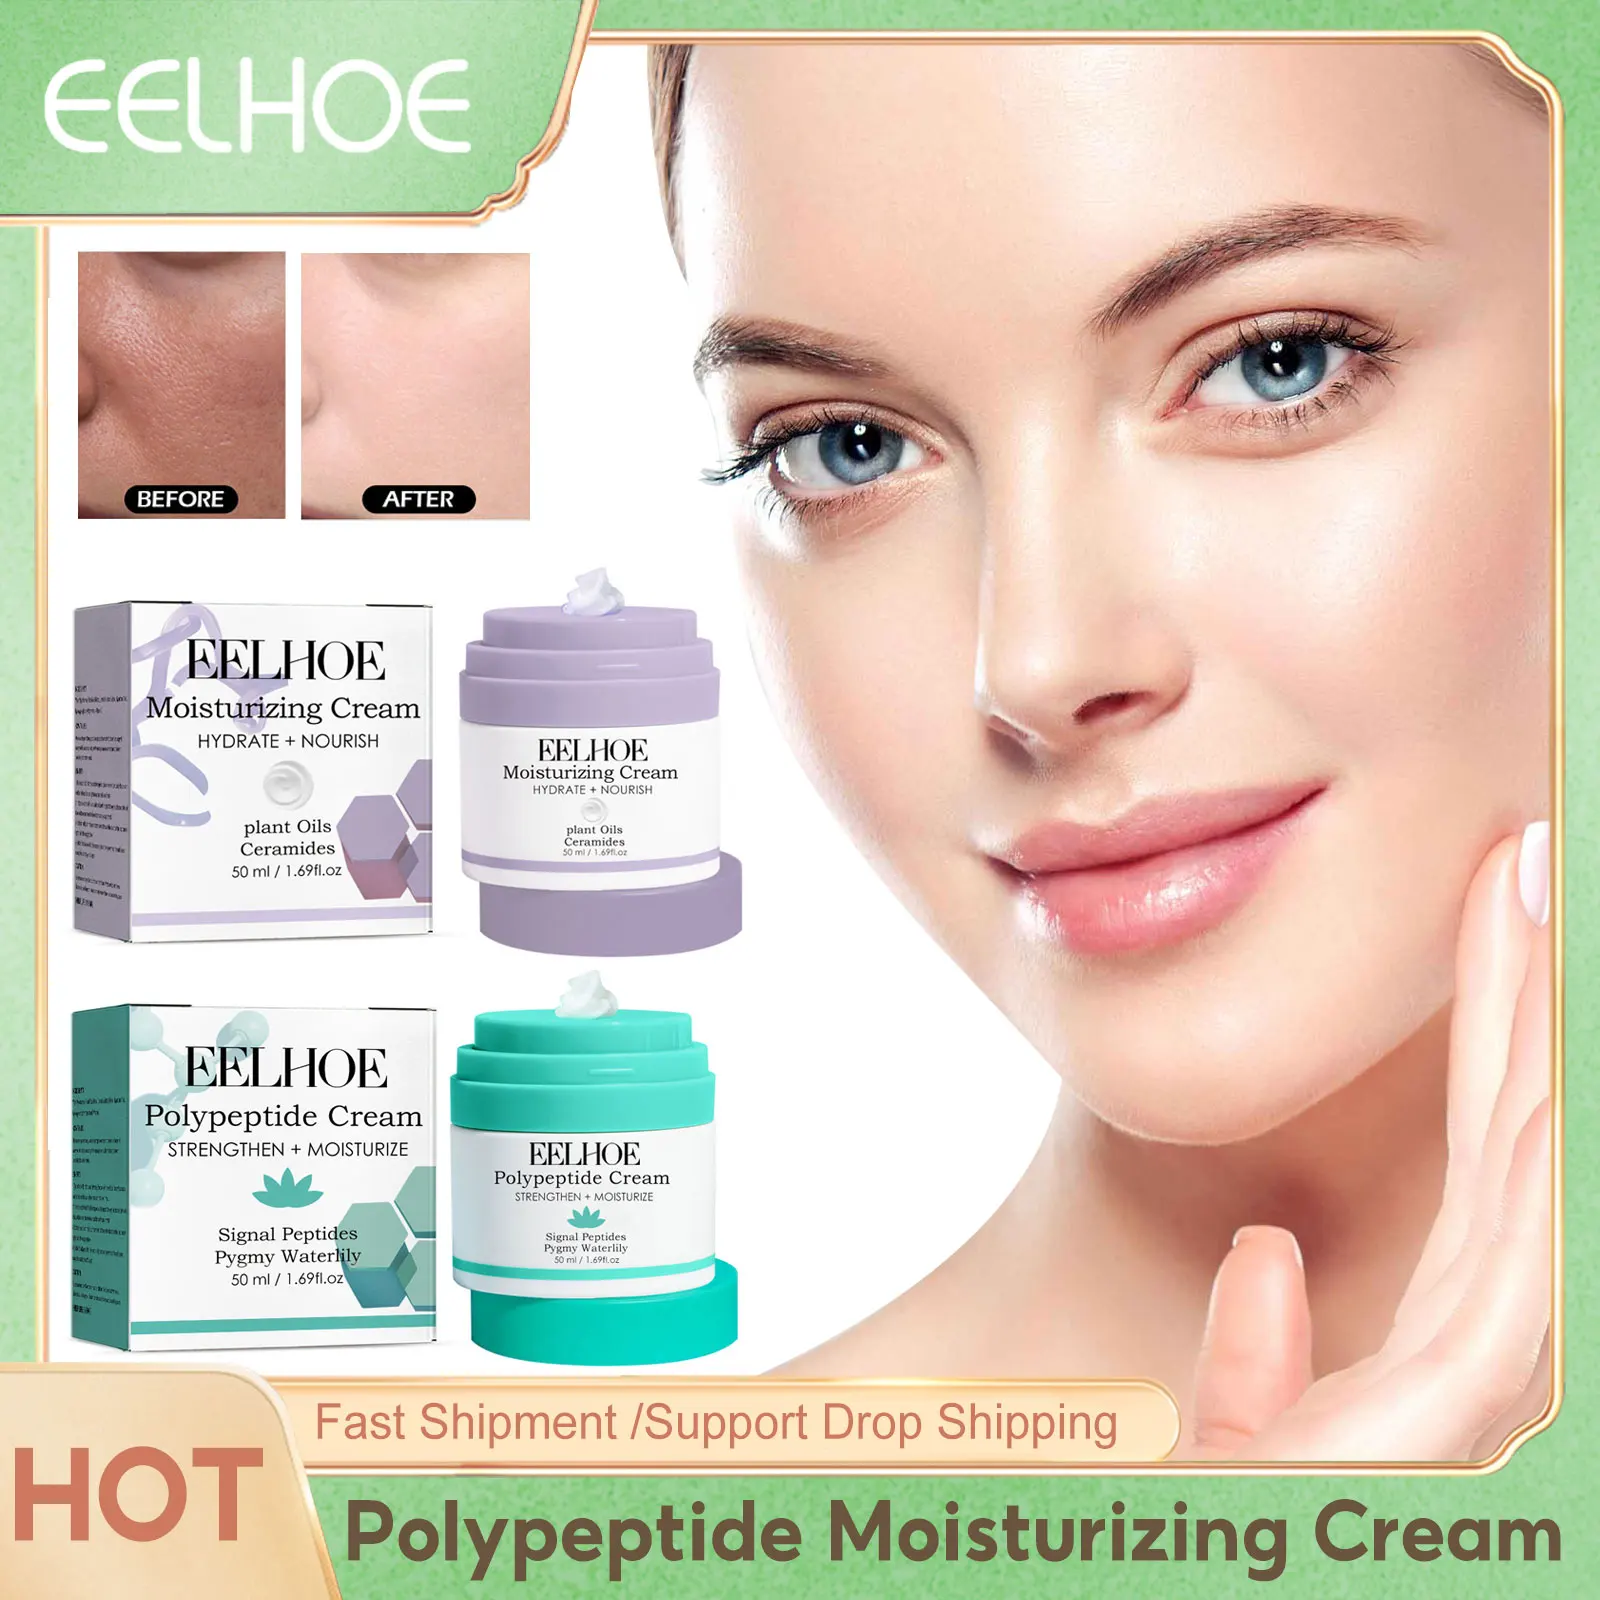 

EELHOE Polypeptide Moisturizing Cream Fade Fine Lines Firming Cream for Face Wrinkles Remove Anti-Aging Brighten Care Skin White